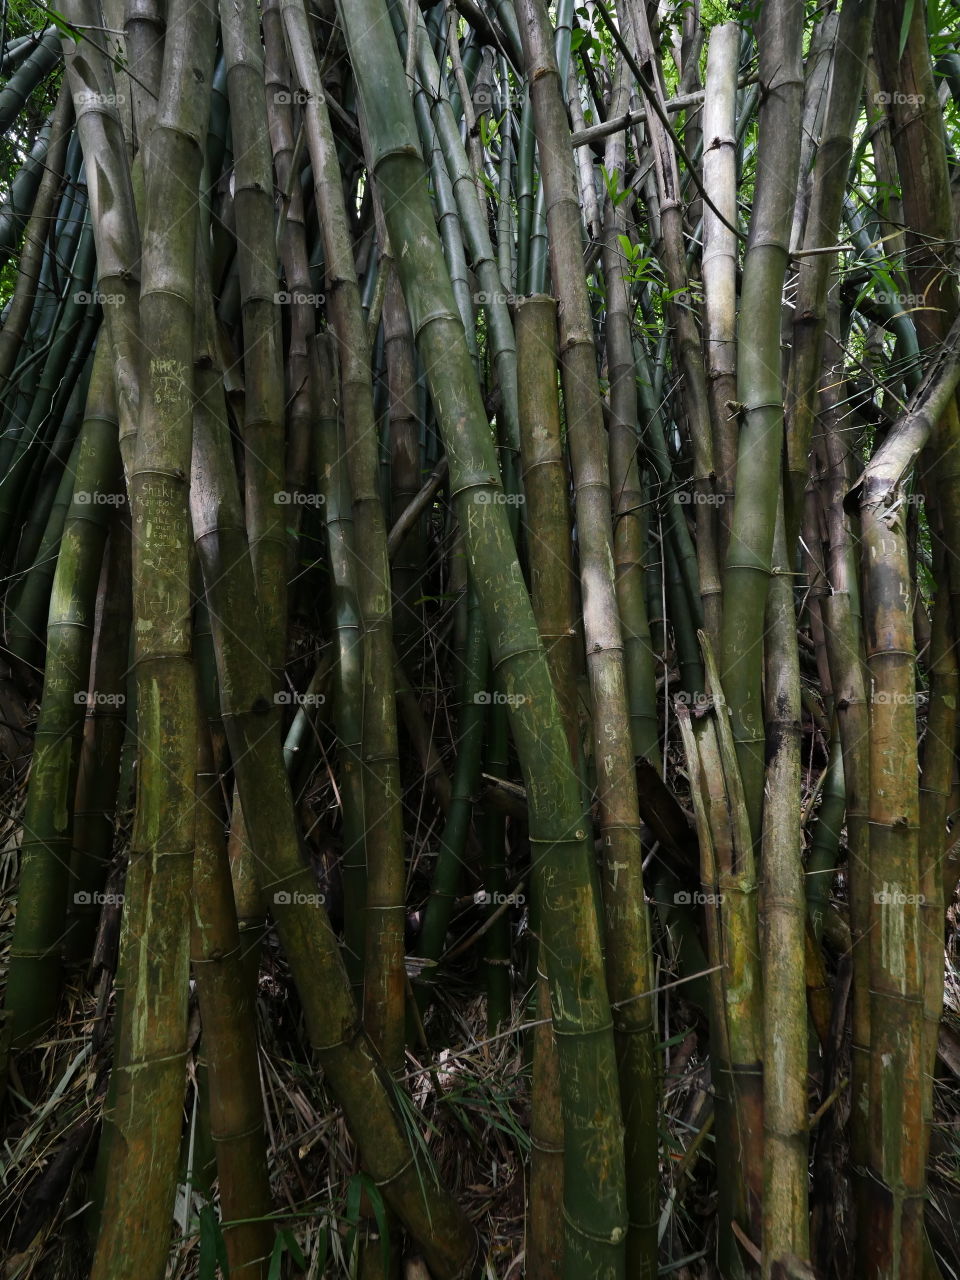 Bamboo forest texture 